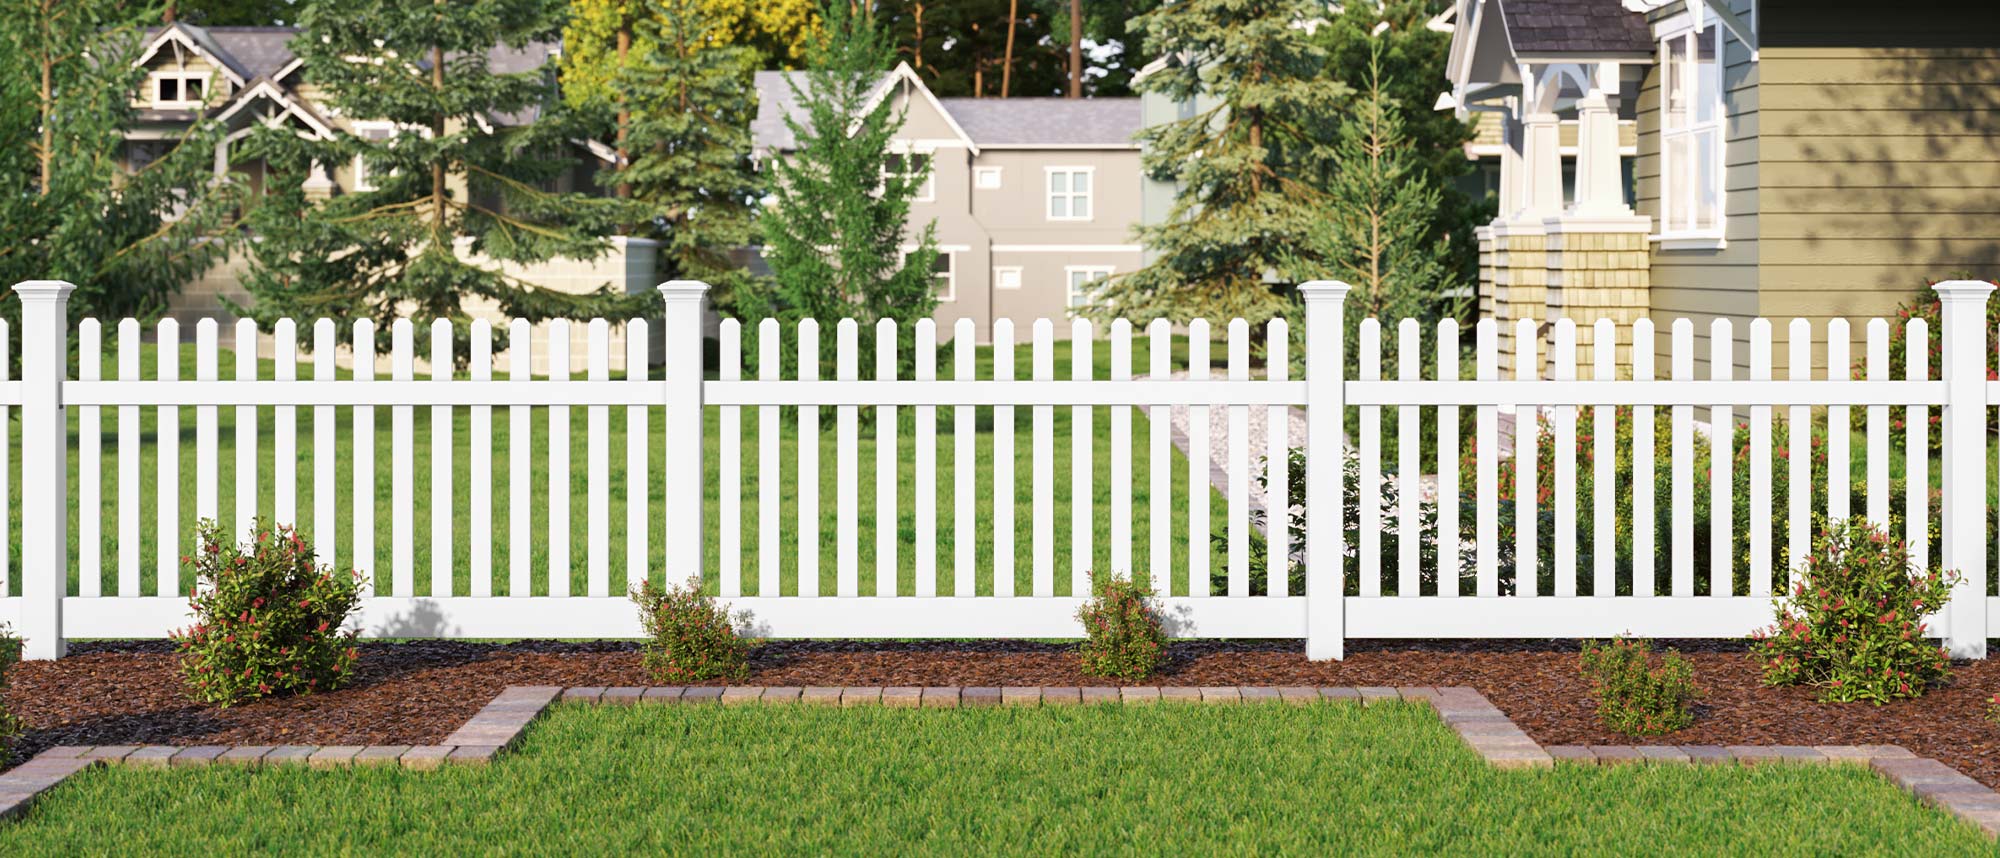 Evansville Indiana Vinyl Security Fence - Silverbell Style